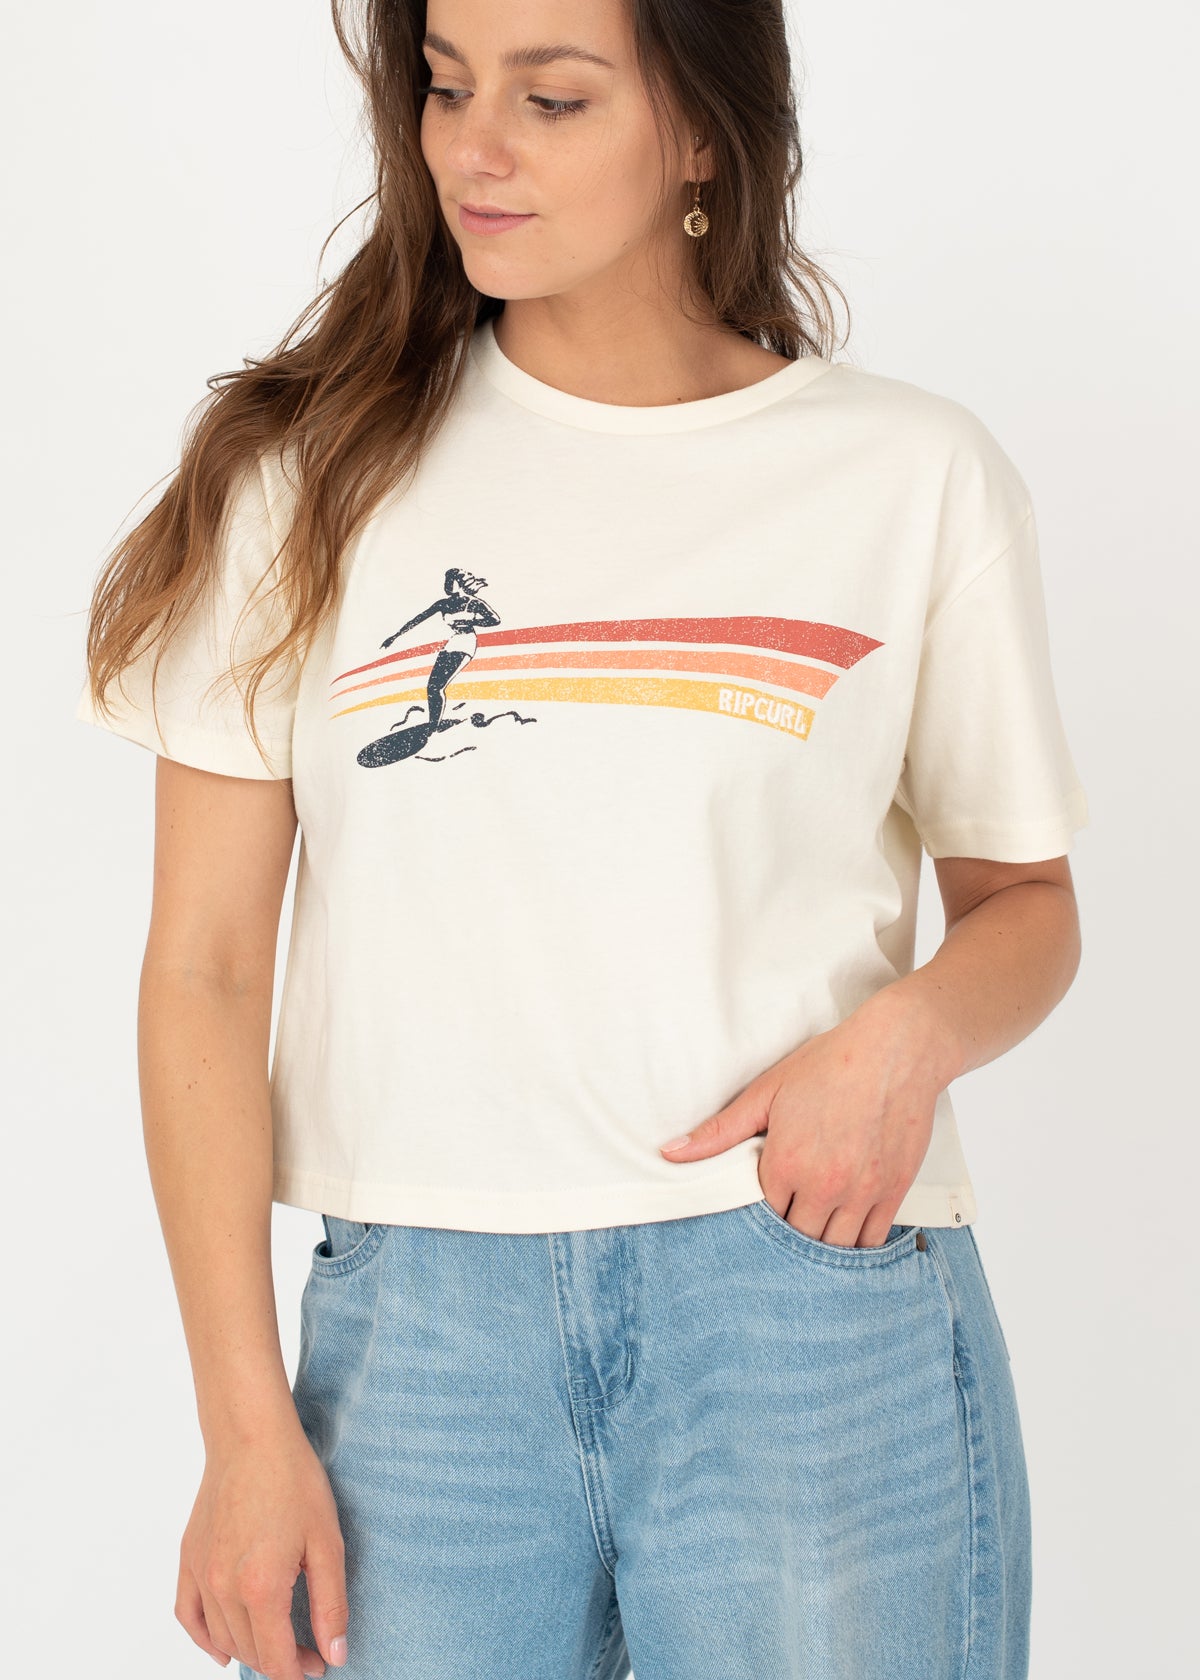 Golden State Crop Tee in Vintage White by Rip Curl